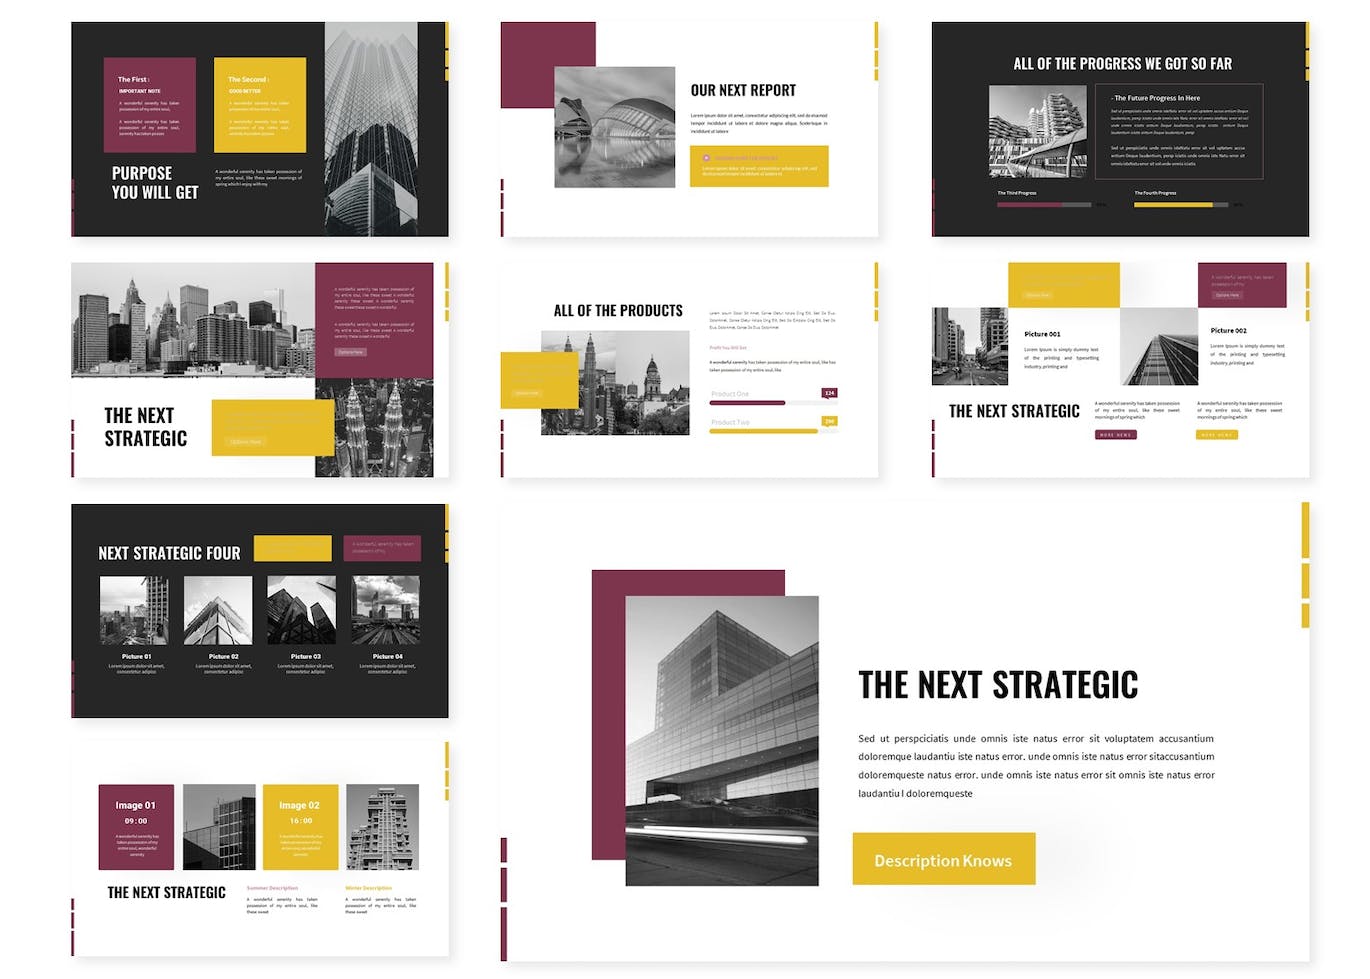 A selection of irresistible business strategy plan presentation template slides.